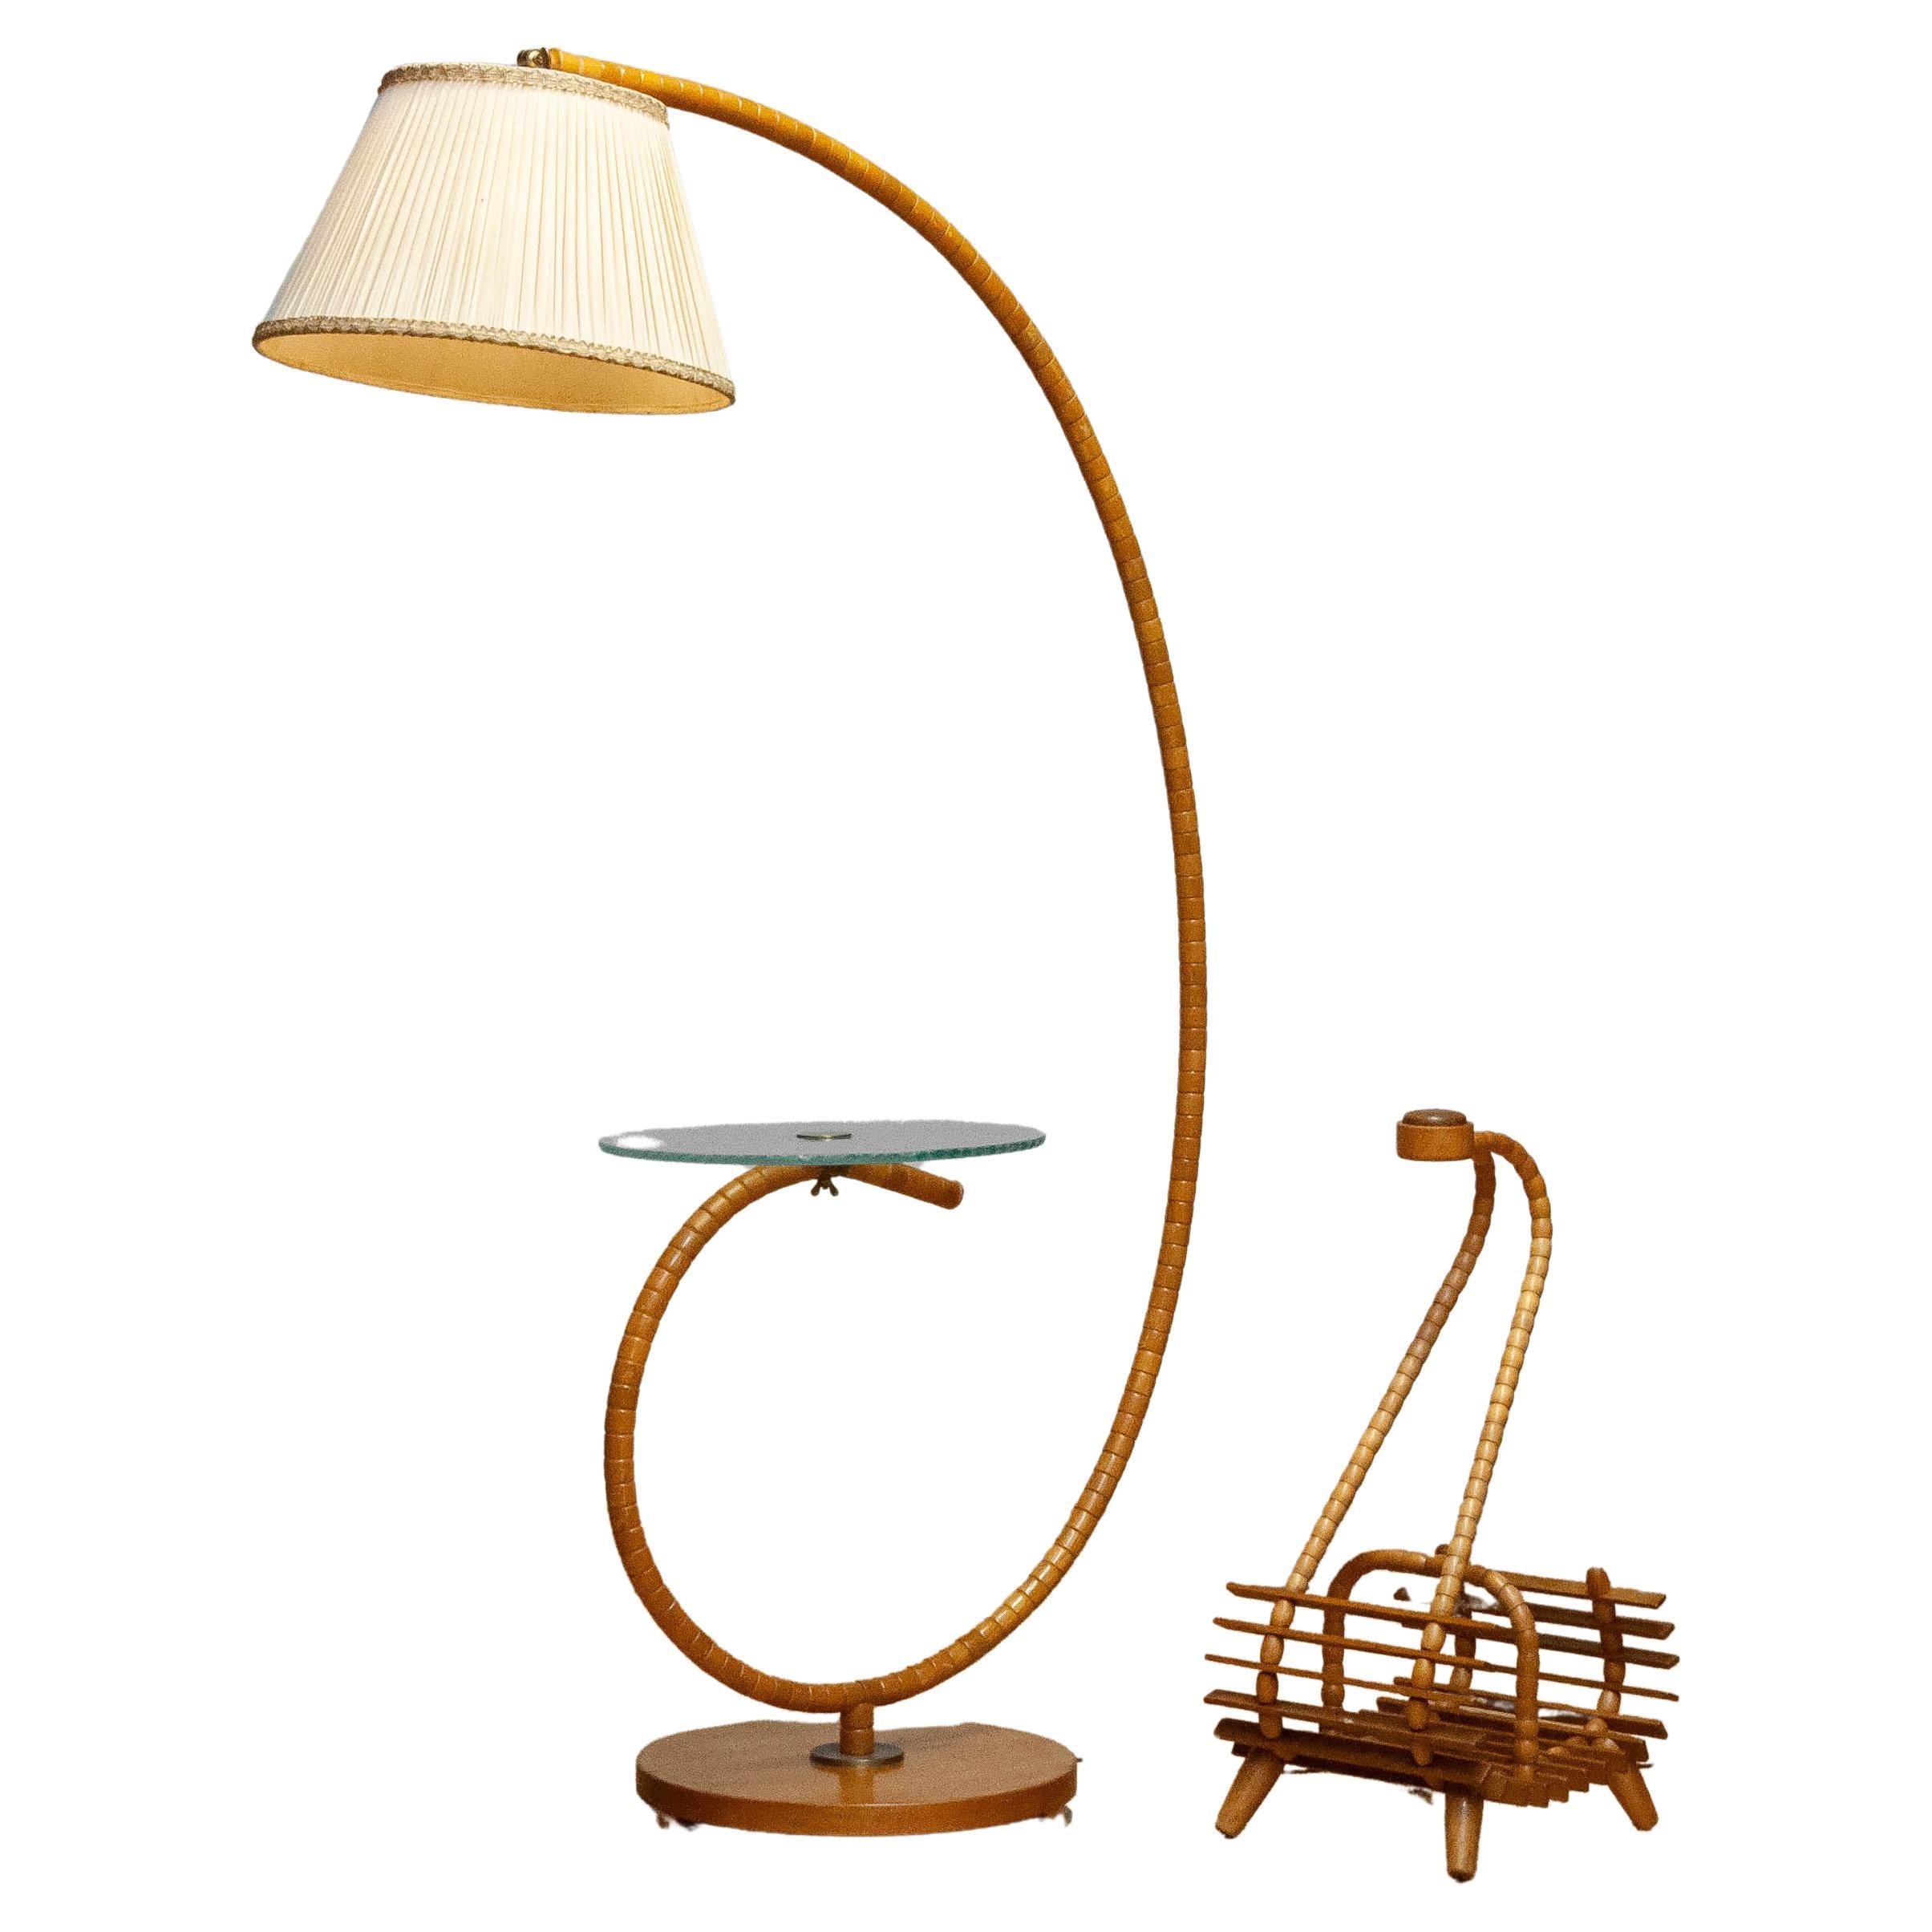 1940 Swedish Art Nouveau Floor Lamp In Elm By IWO Mariestad  And Magazine rack For Sale